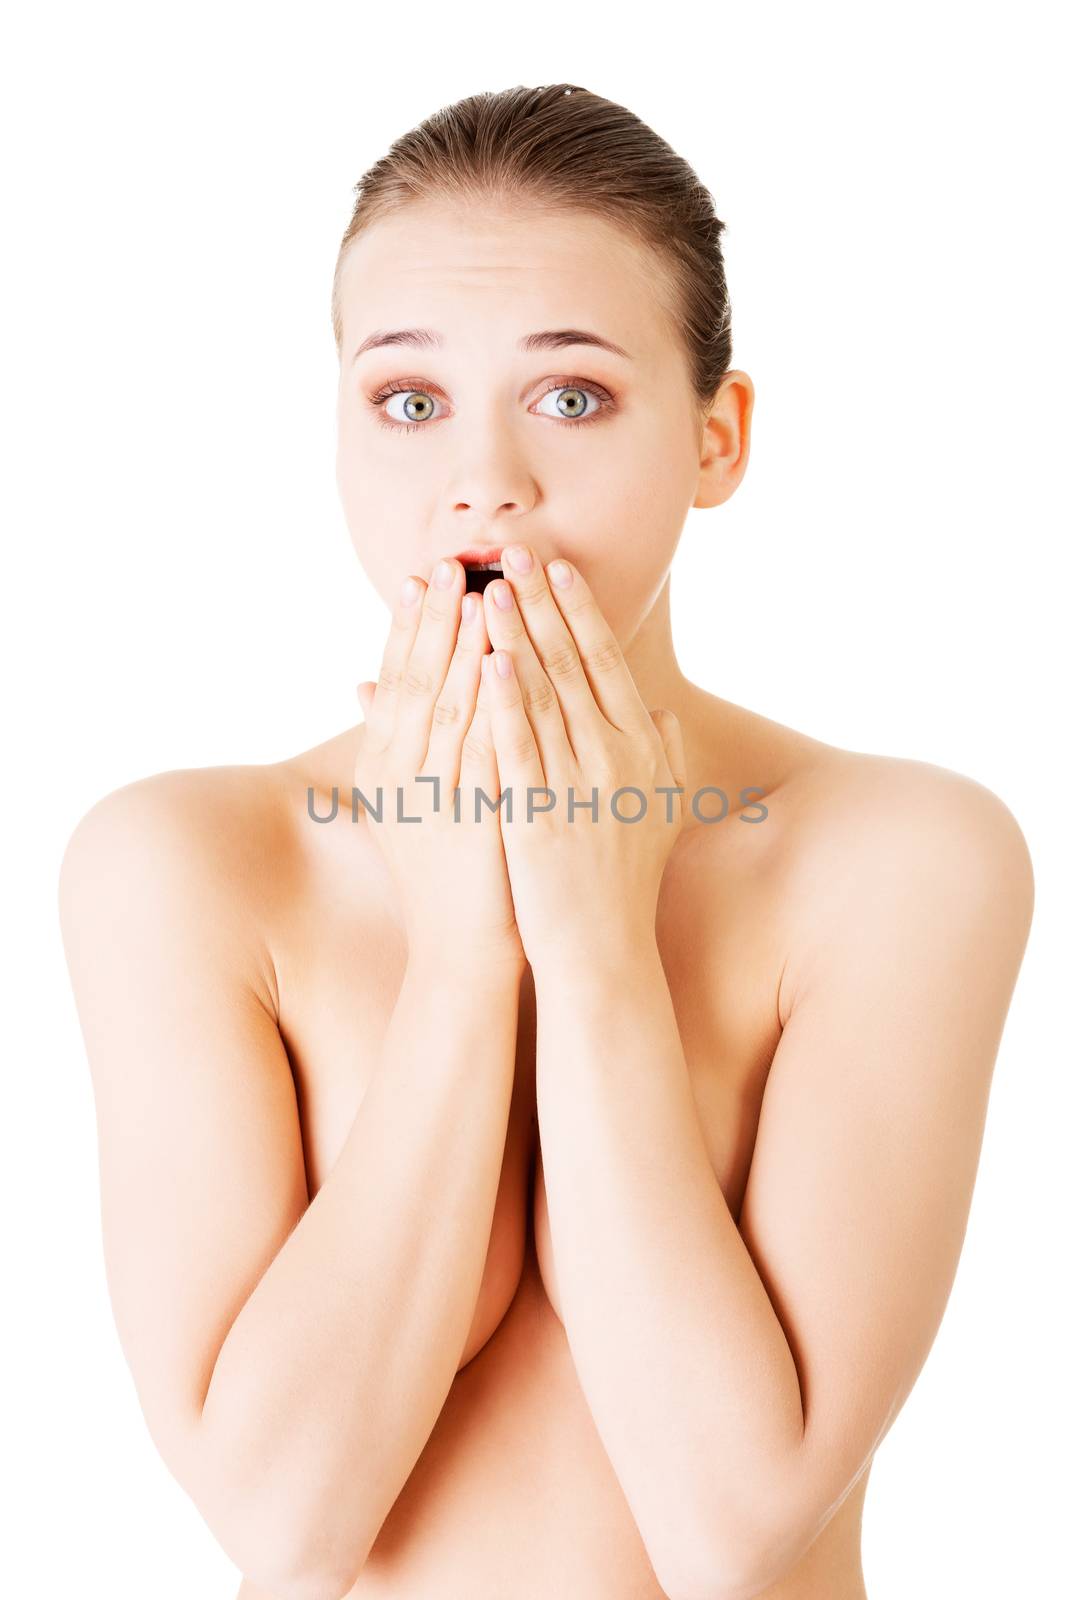 Attractive young naked woman expresses a shock. Isolated on white.